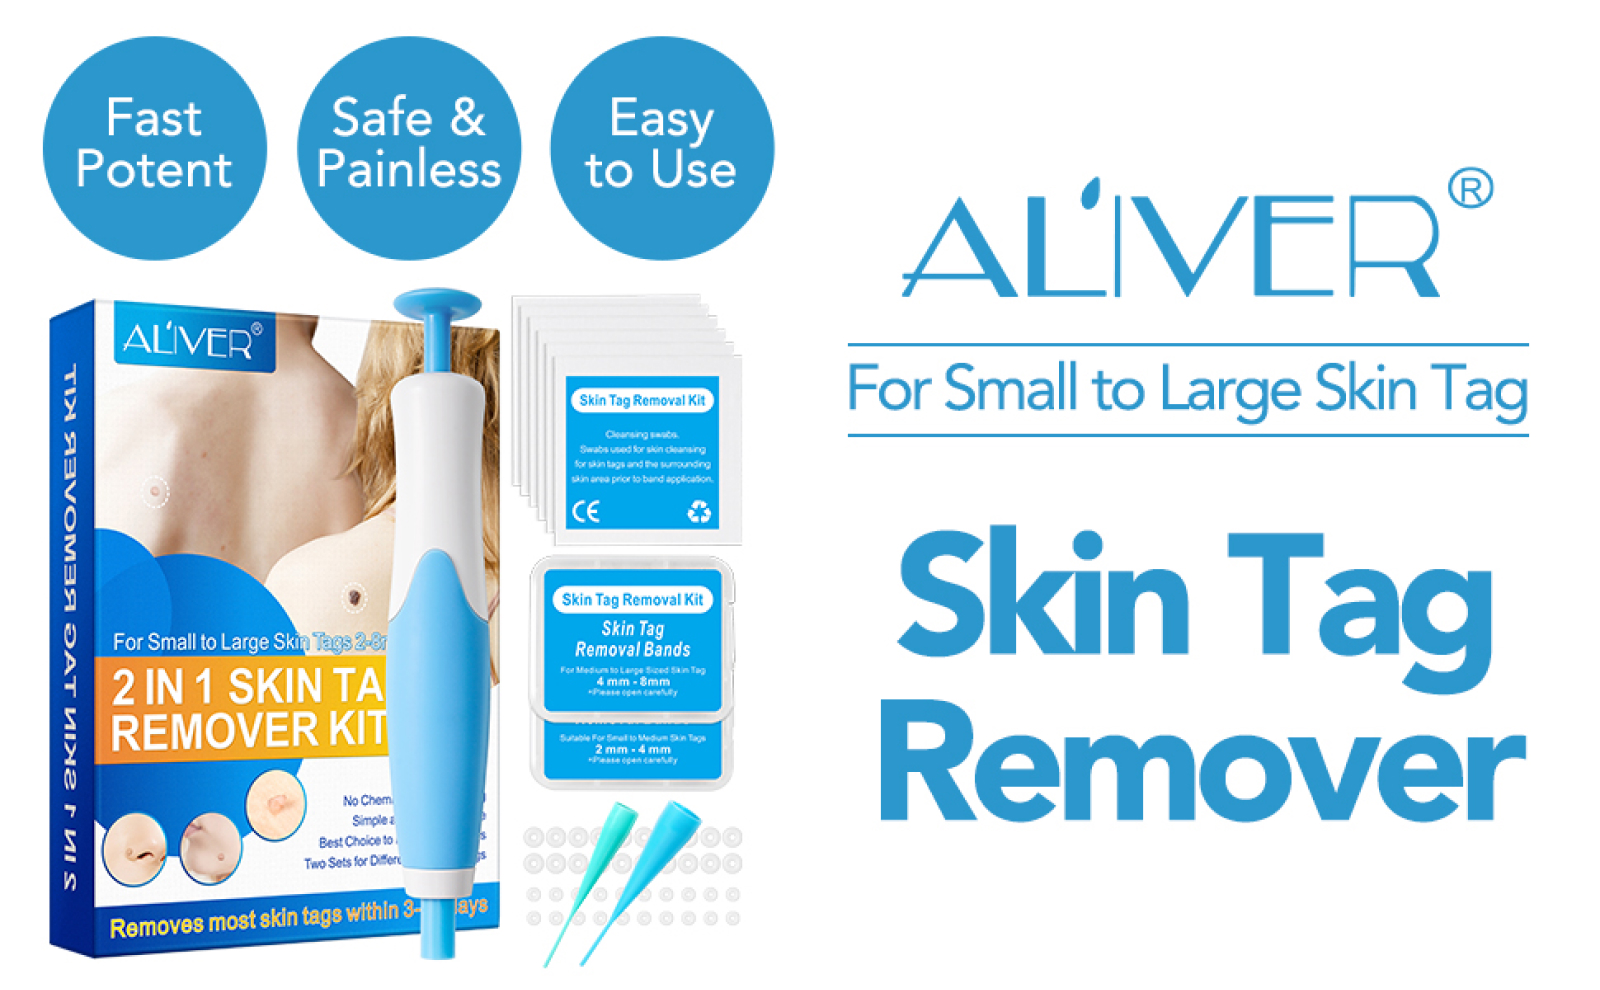 Aliver Body Skin Tag Mole Wart Removal Pen Tool Auto Bands Remover Kit Fast Instant Effect Micro Safe Painless